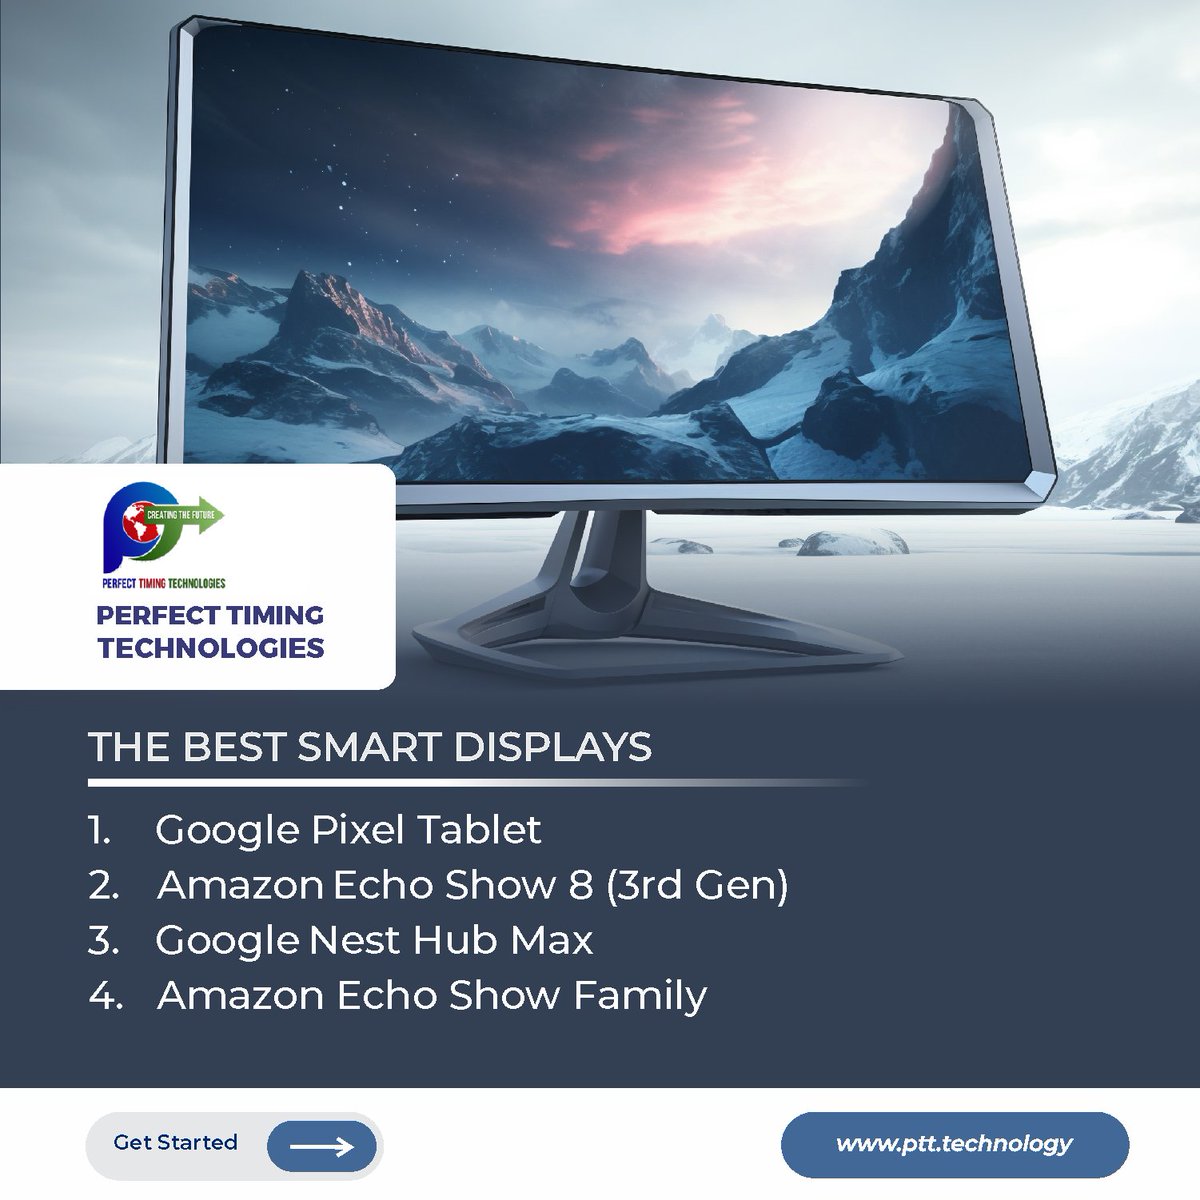 The Best Smart Displays
Read Here: wired.com/gallery/best-s…

#PerfectTimingTechnology #PerfectTimingHolding #SmartDisplays #SmartHomeTech #DigitalAssistants #VoiceControlledDevices #HomeAutomation #InteractiveScreens #ConnectedDevices #IntelligentTechnology #HomeEntertainment